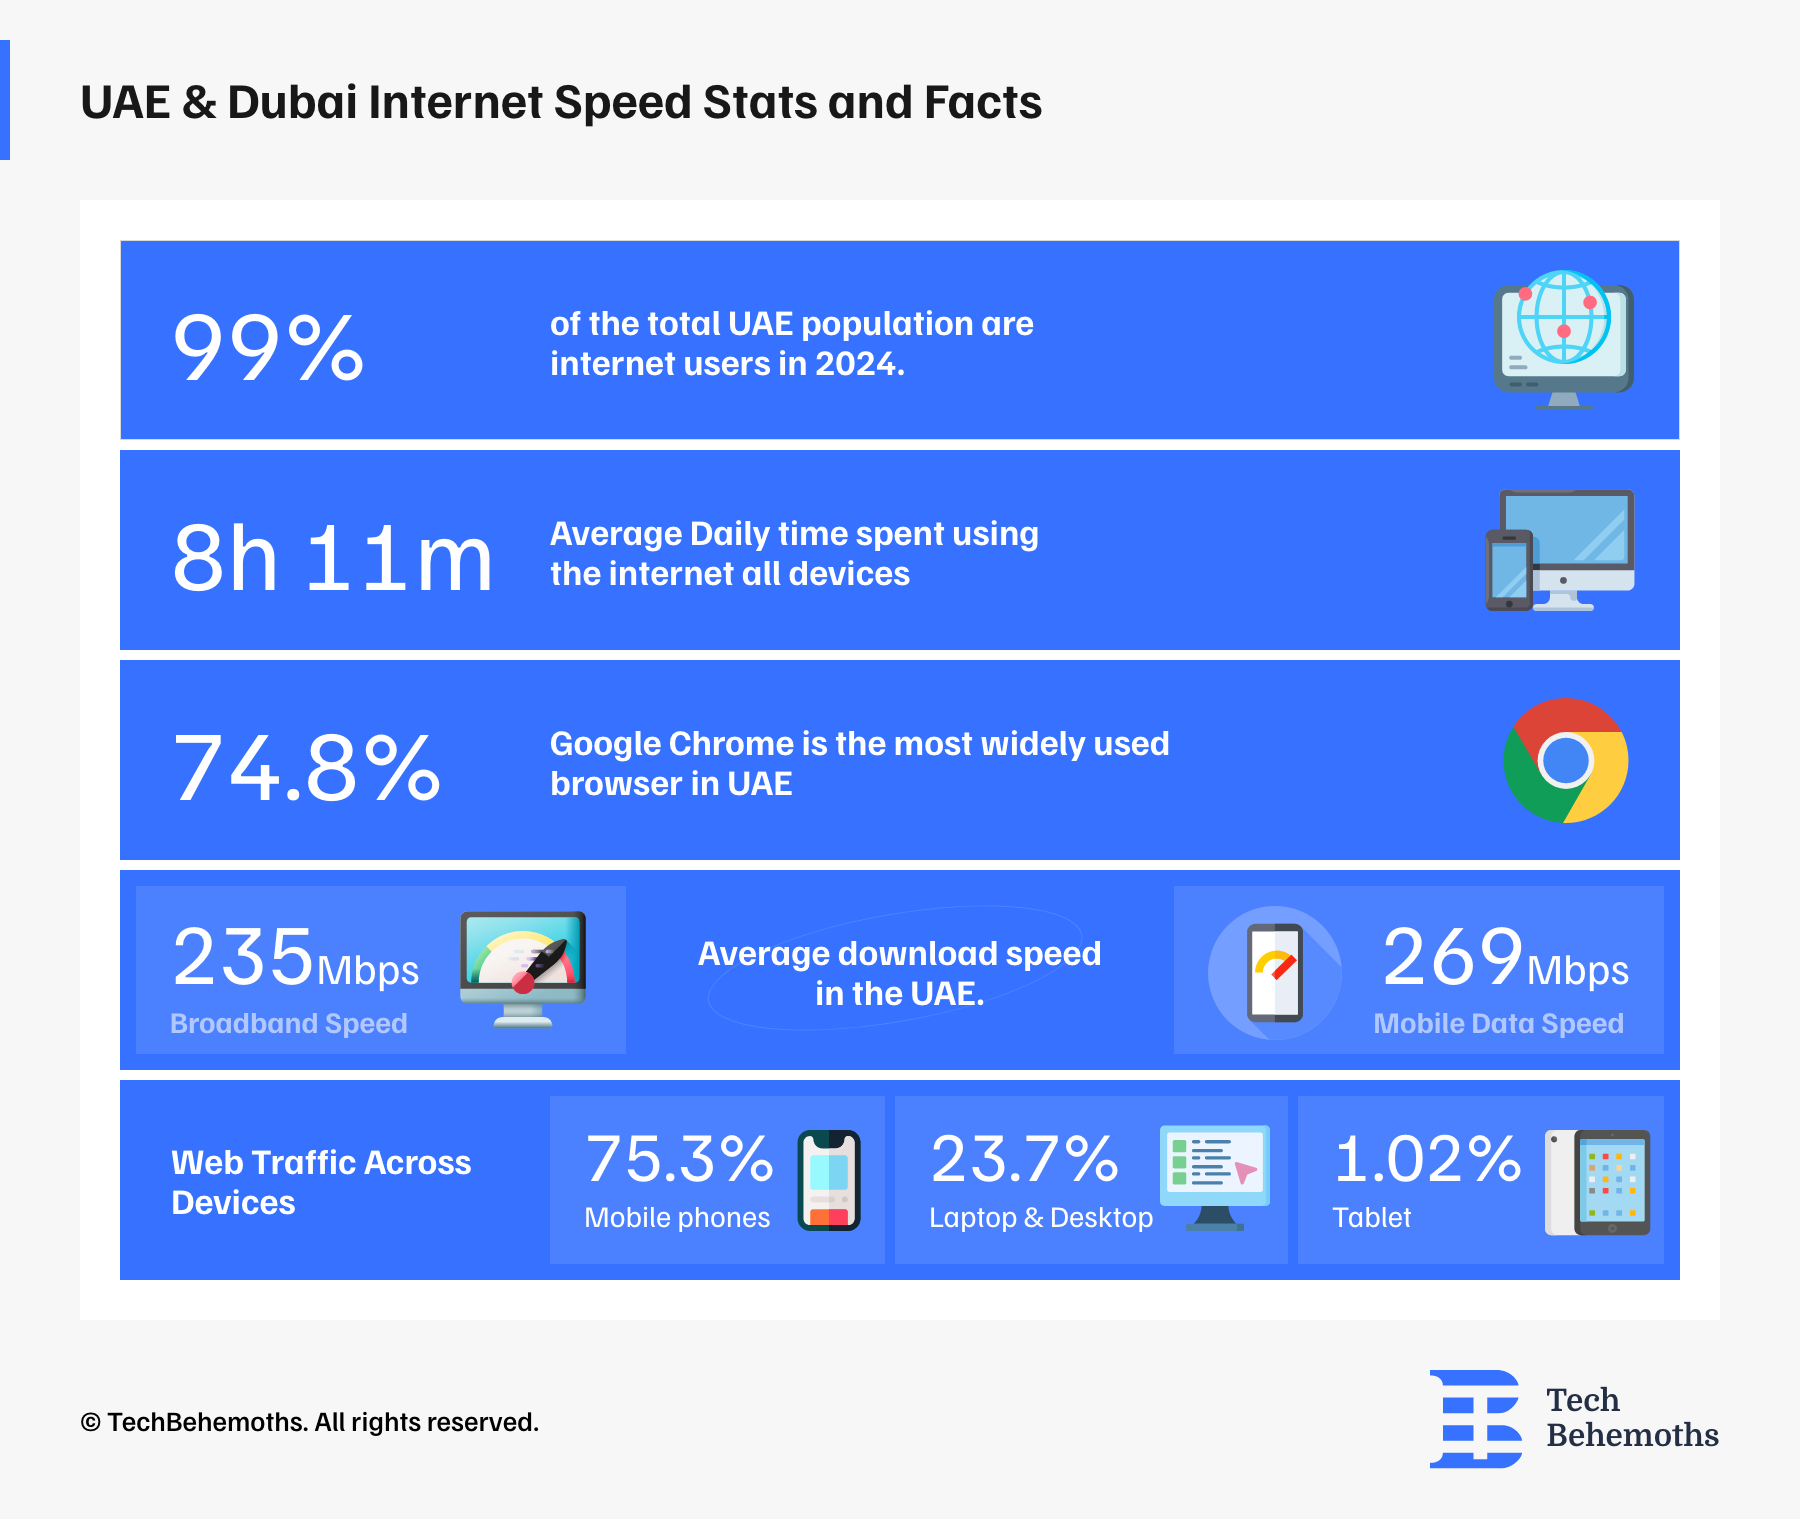 UAE & Dubai Internet Speed Stats and Facts